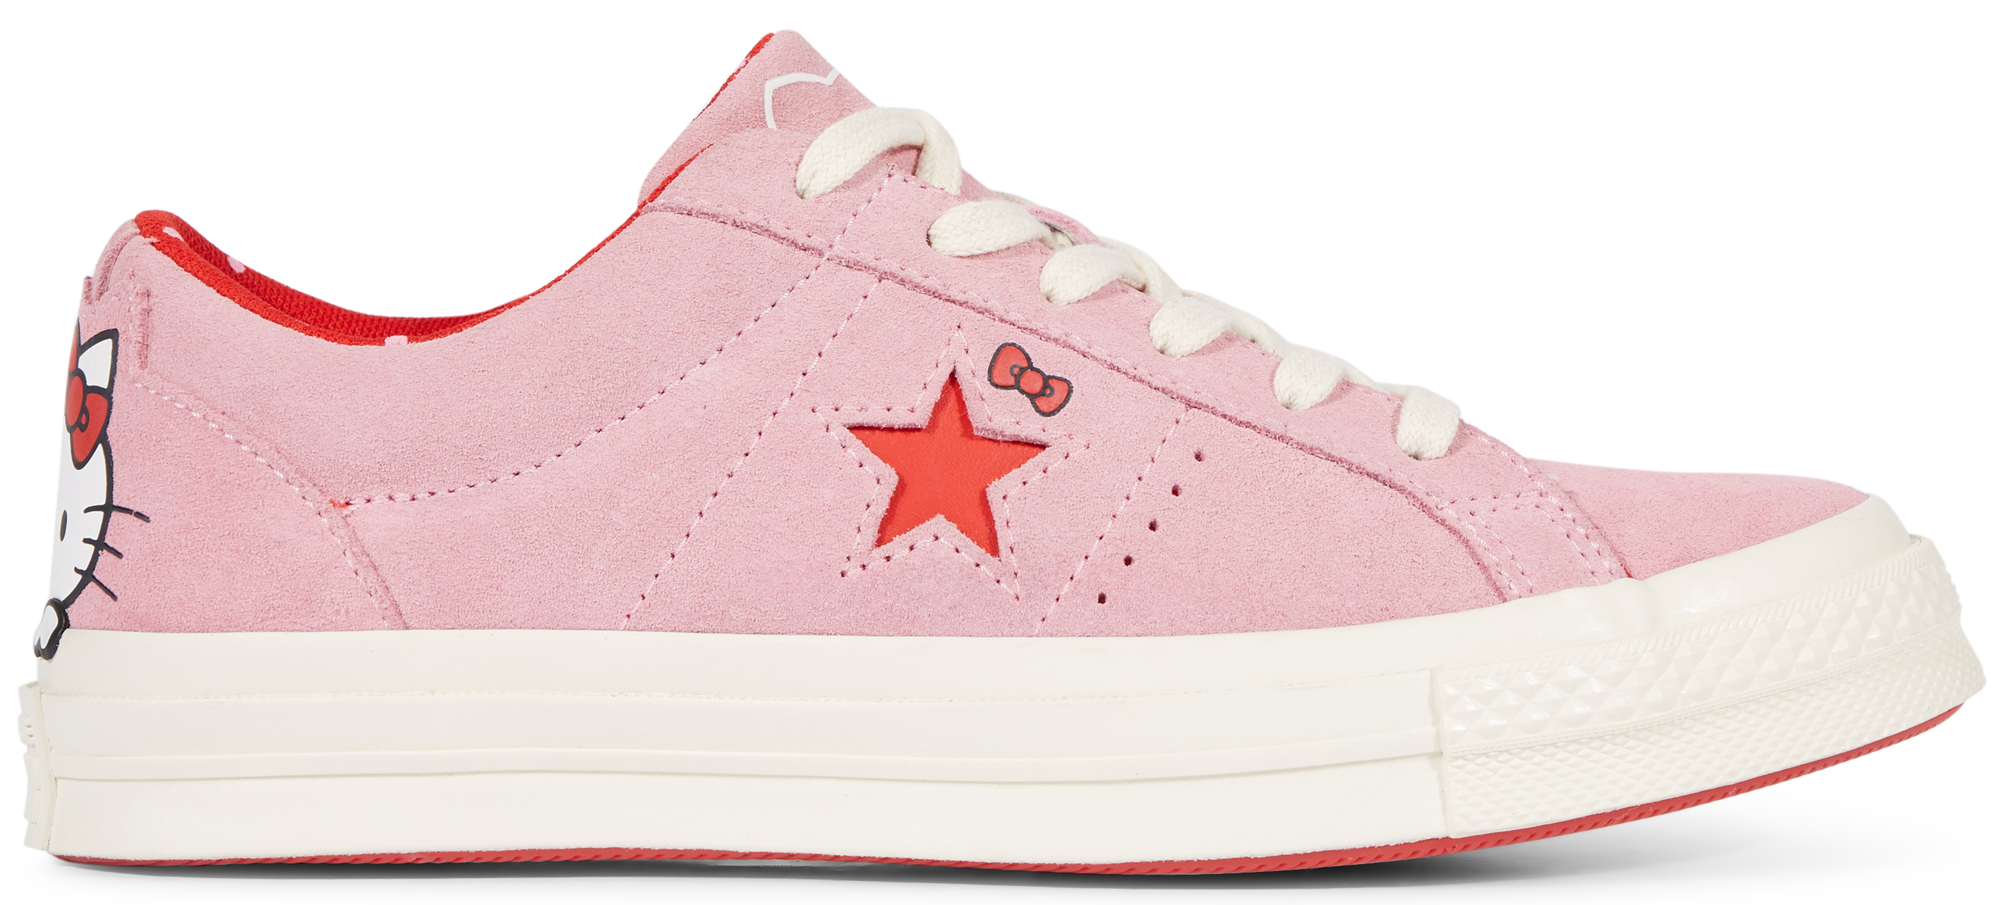 Converse One Star Ox Hello Kitty Pink 